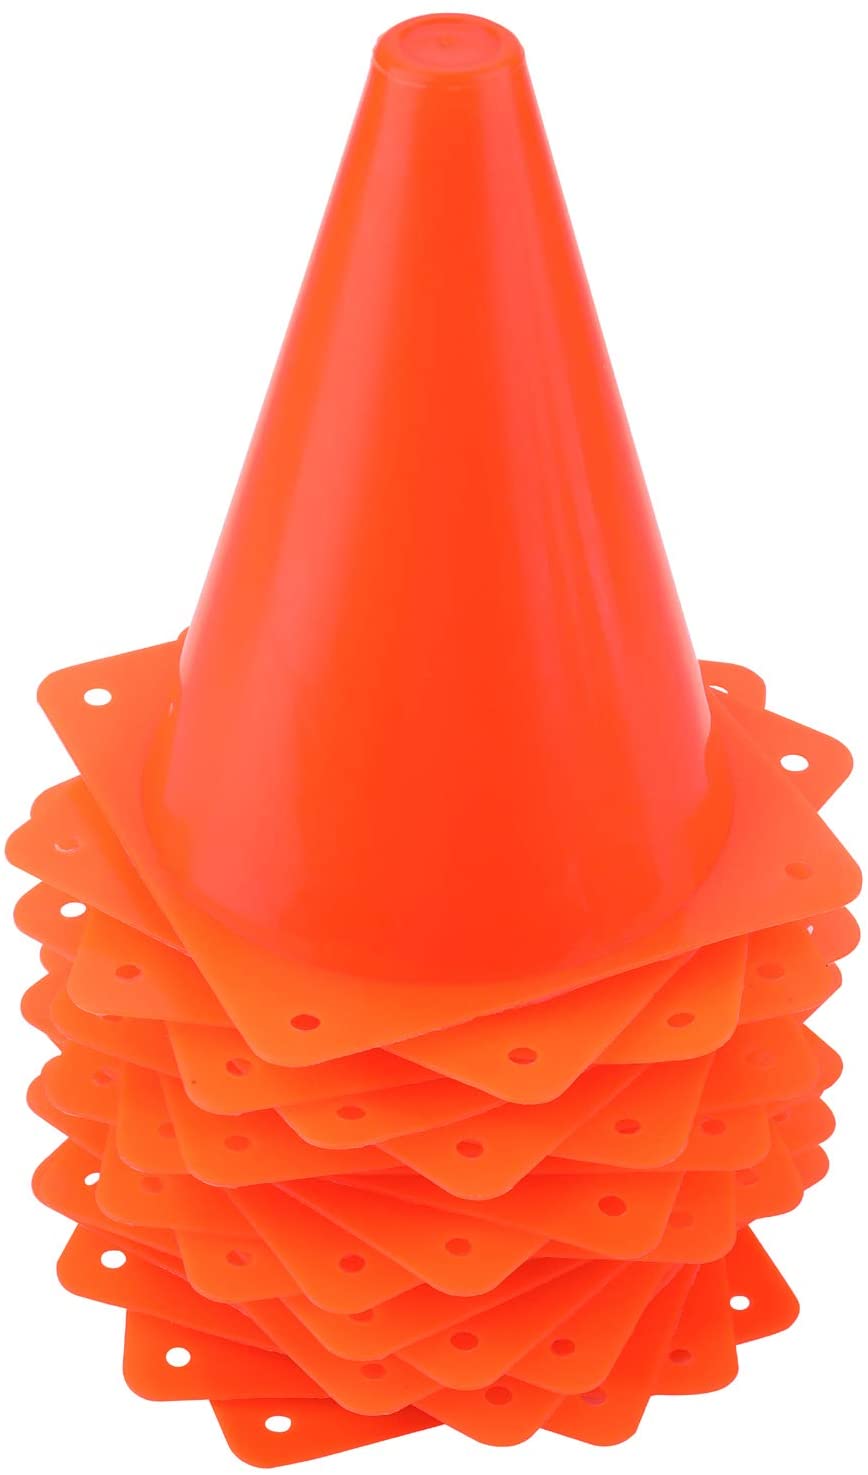 7 inch outdoor field cones - 24 pack various colors